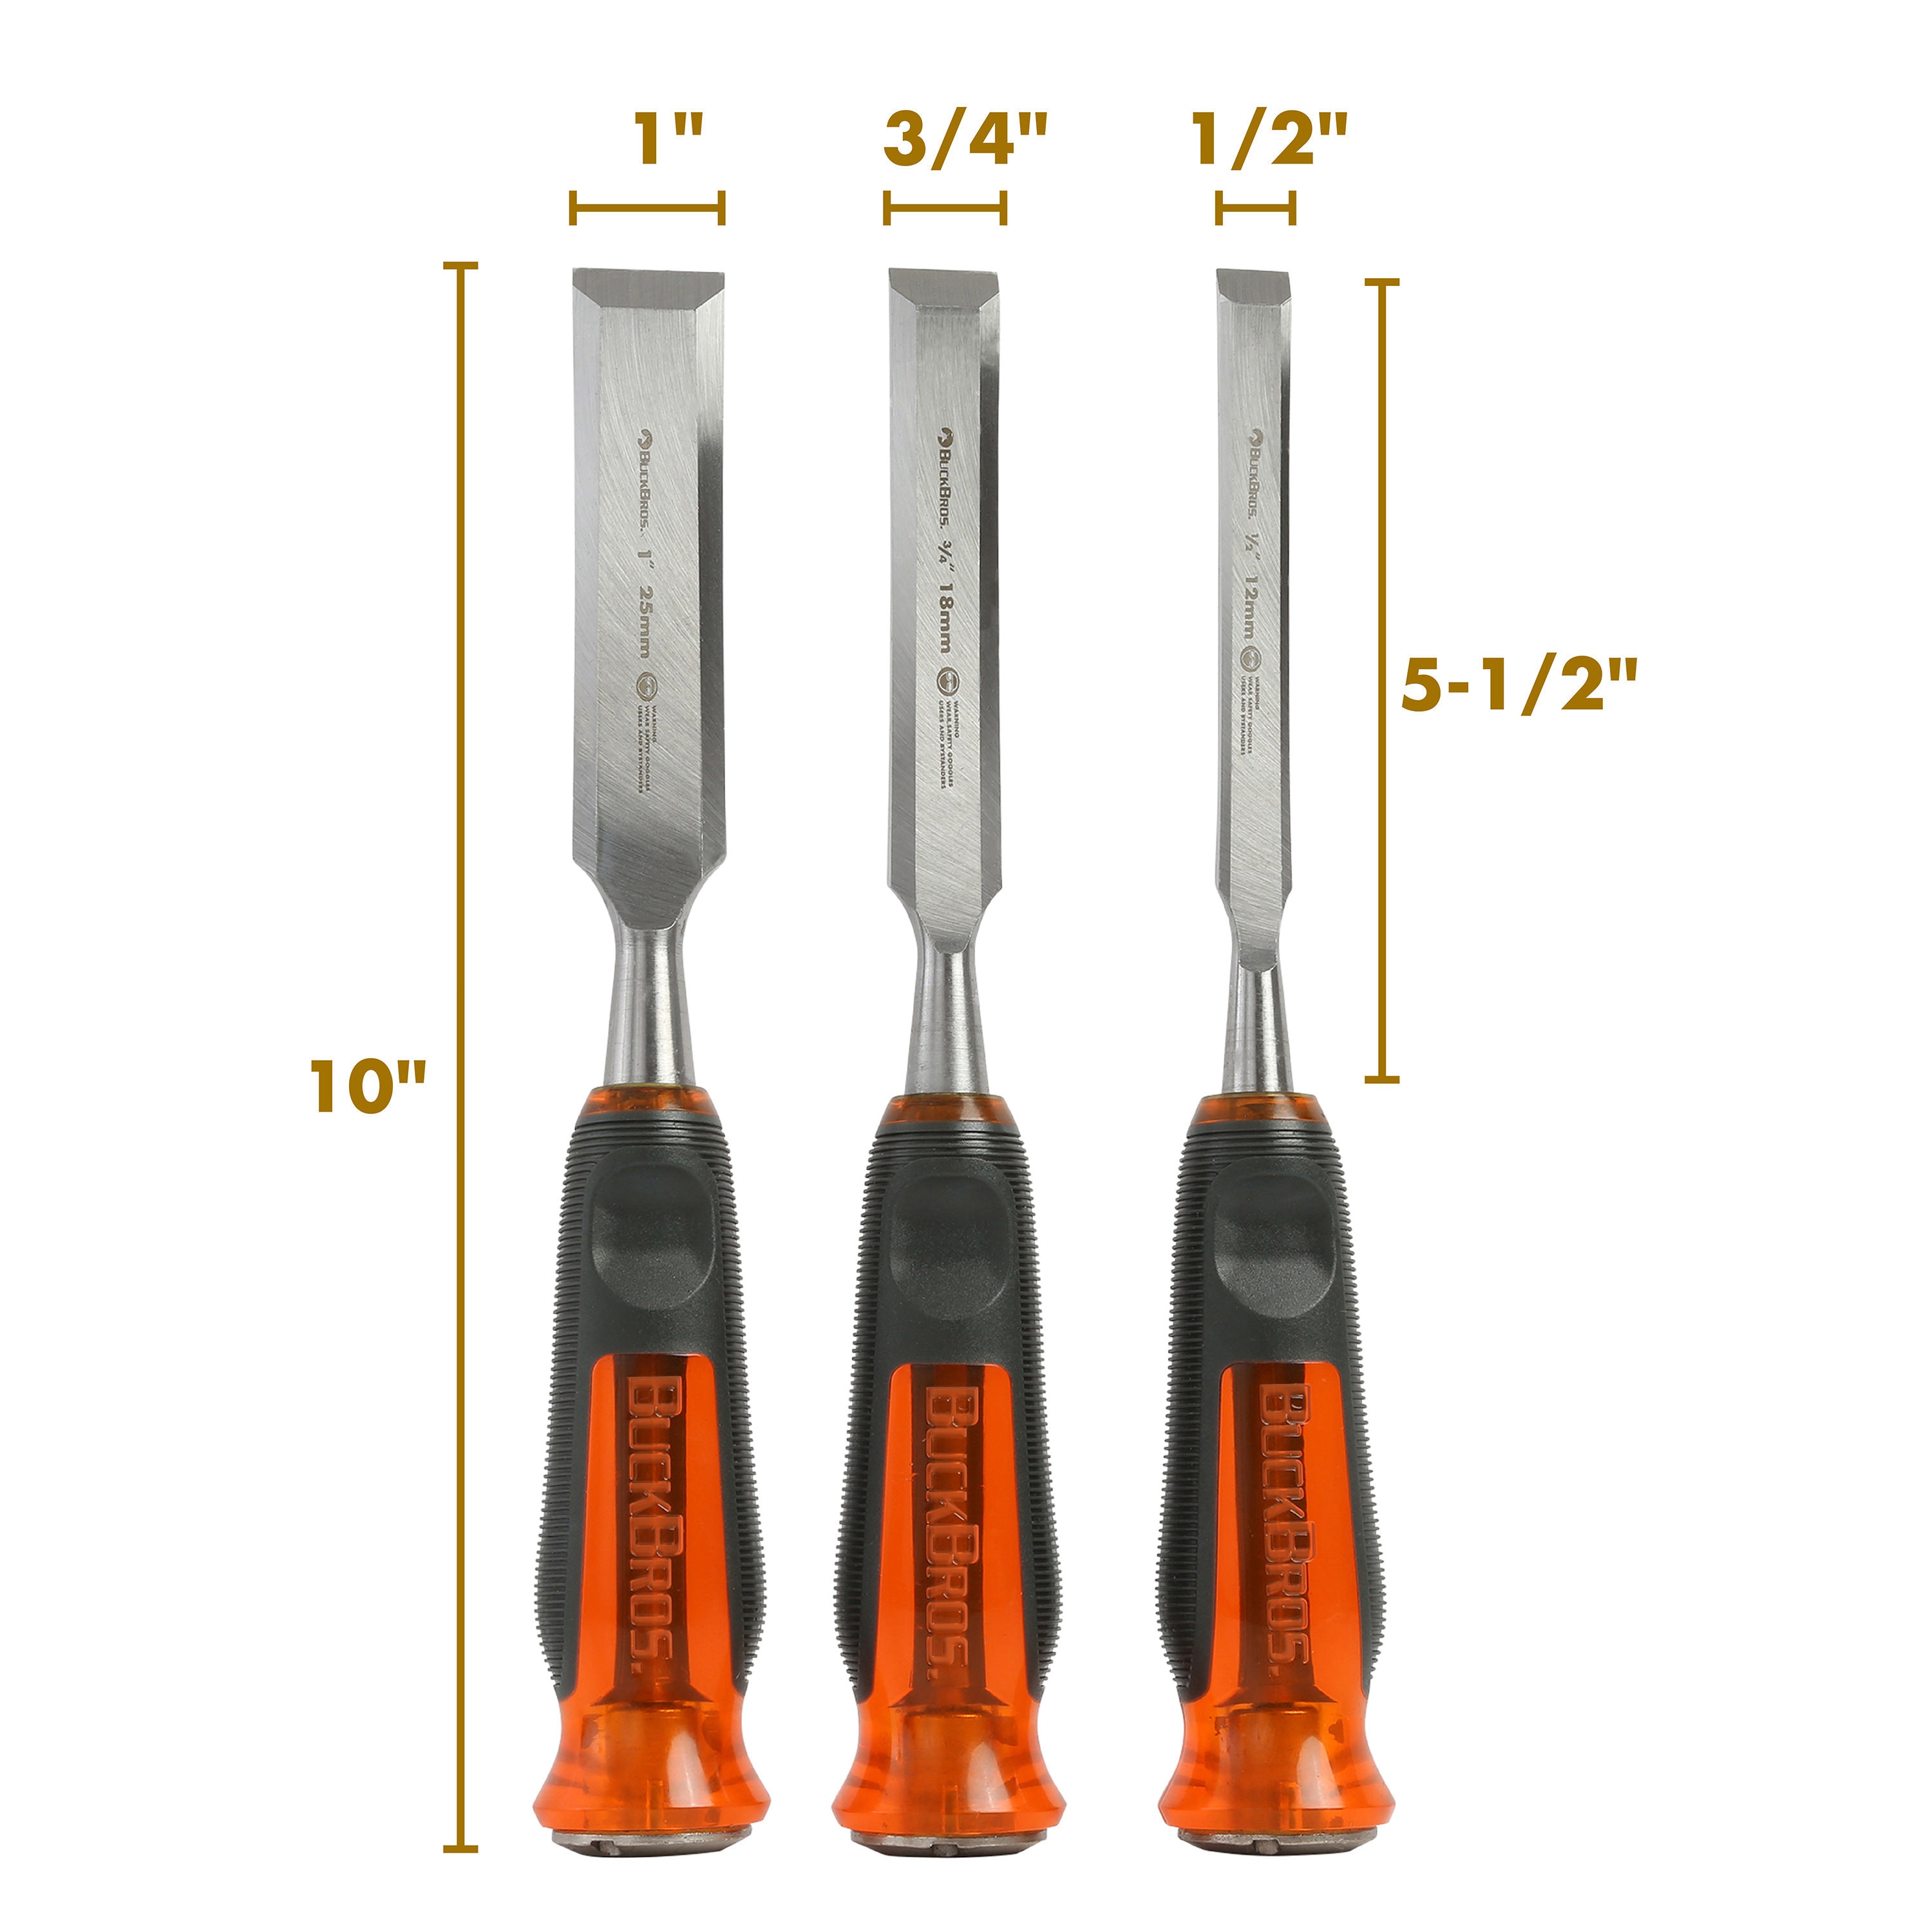 Buck Bros 3-Pack Woodworking Chisels Set in the Chisel Sets